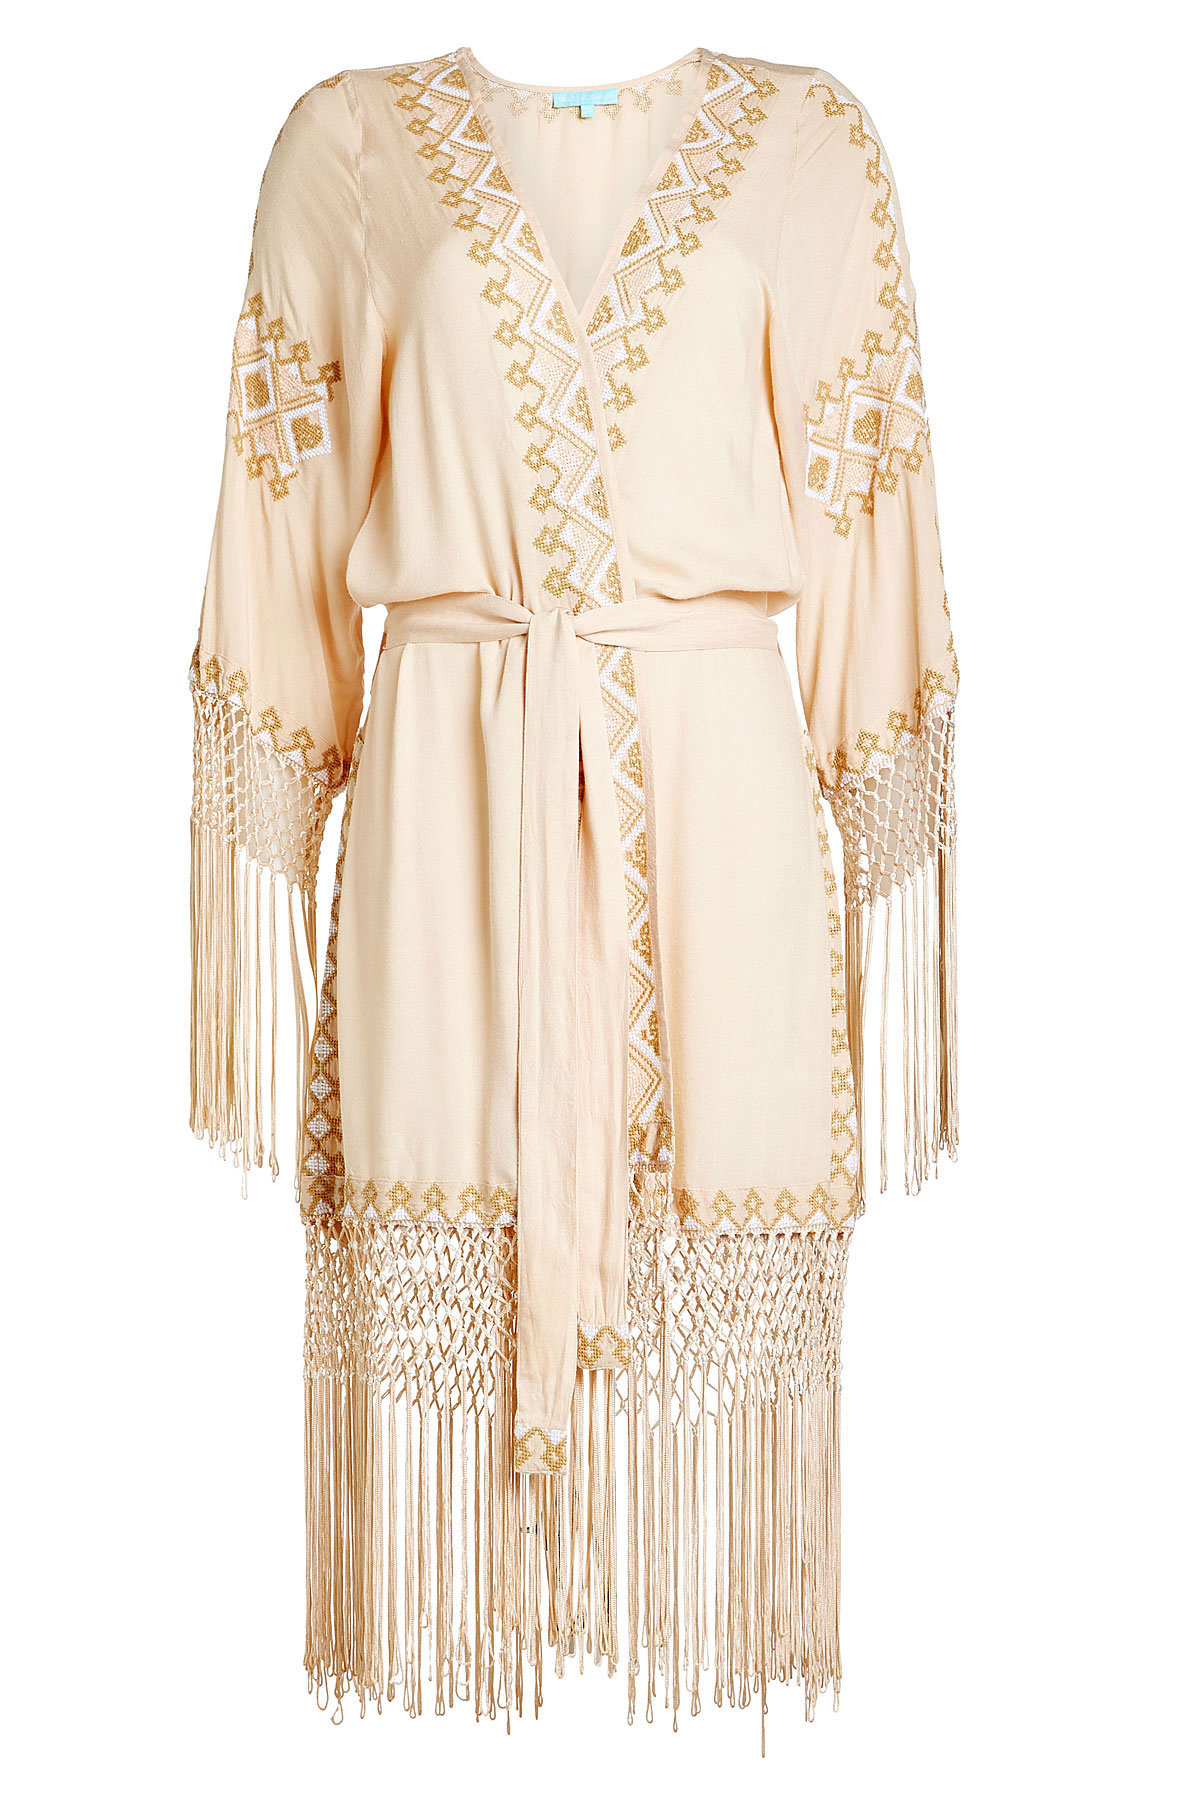 Melissa Odabash - Belted Cover-Up with Embroidery and Fringing